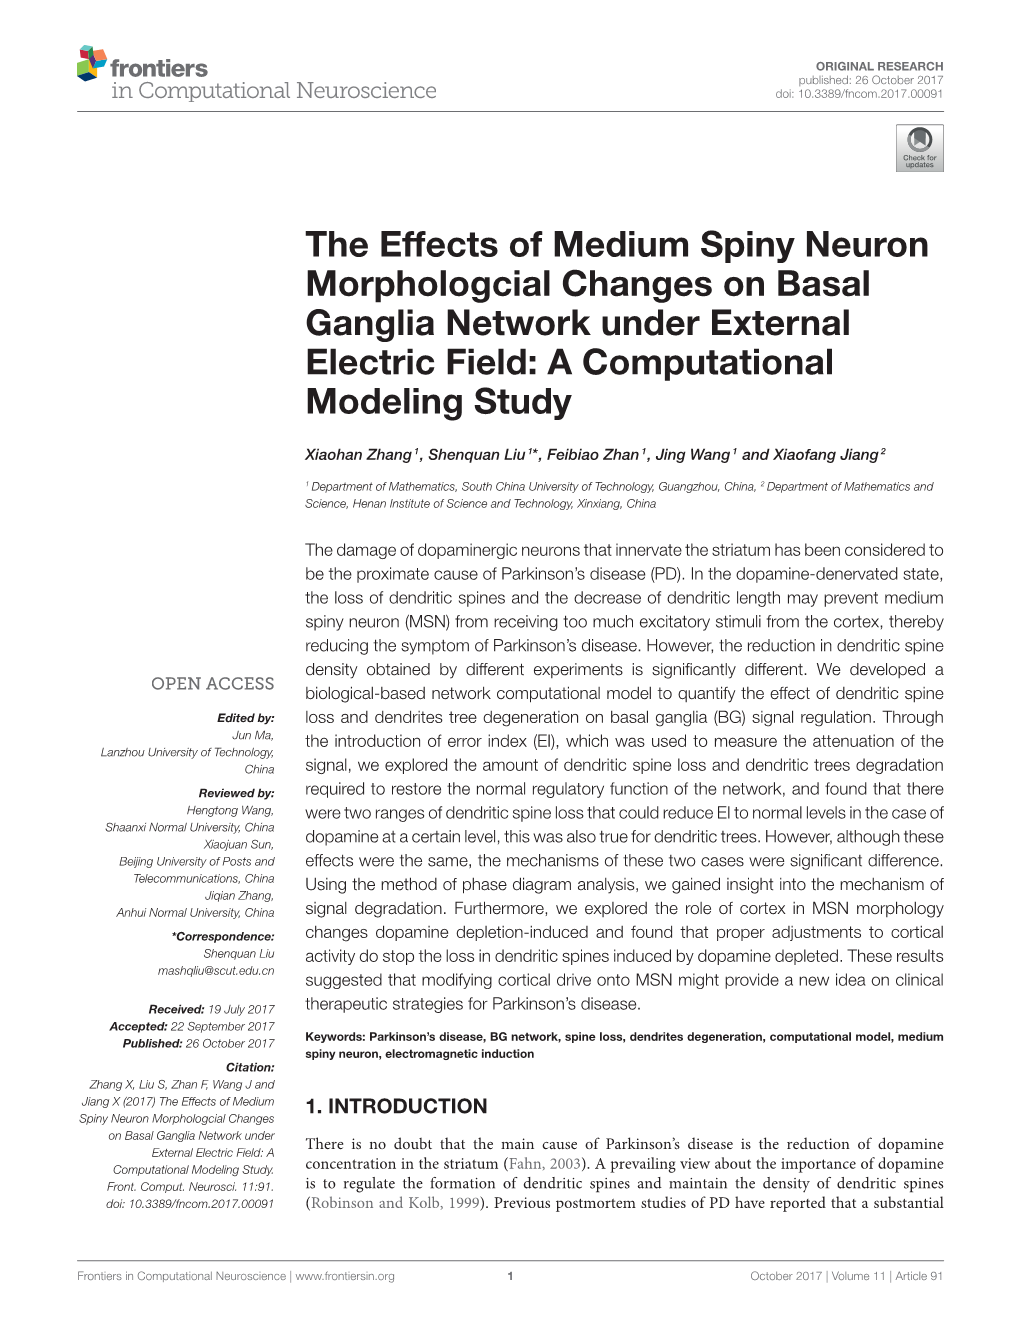 The Effects of Medium Spiny Neuron Morphologcial Changes on Basal Ganglia Network Under External Electric Field: a Computational Modeling Study